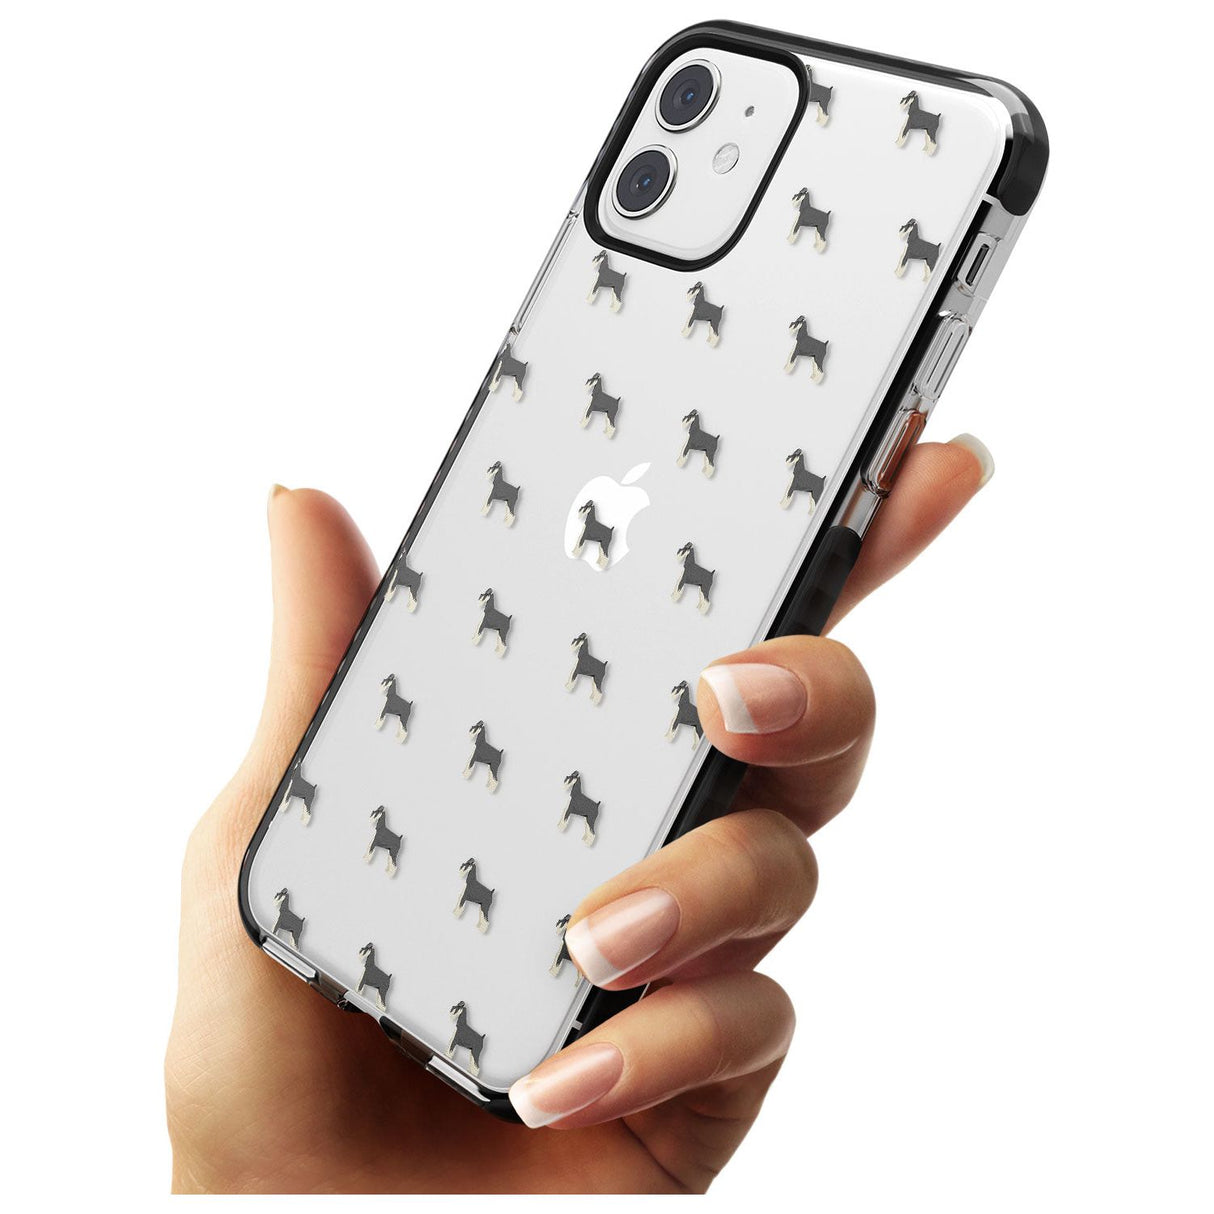 Schnauzer Dog Pattern Clear Black Impact Phone Case for iPhone 11